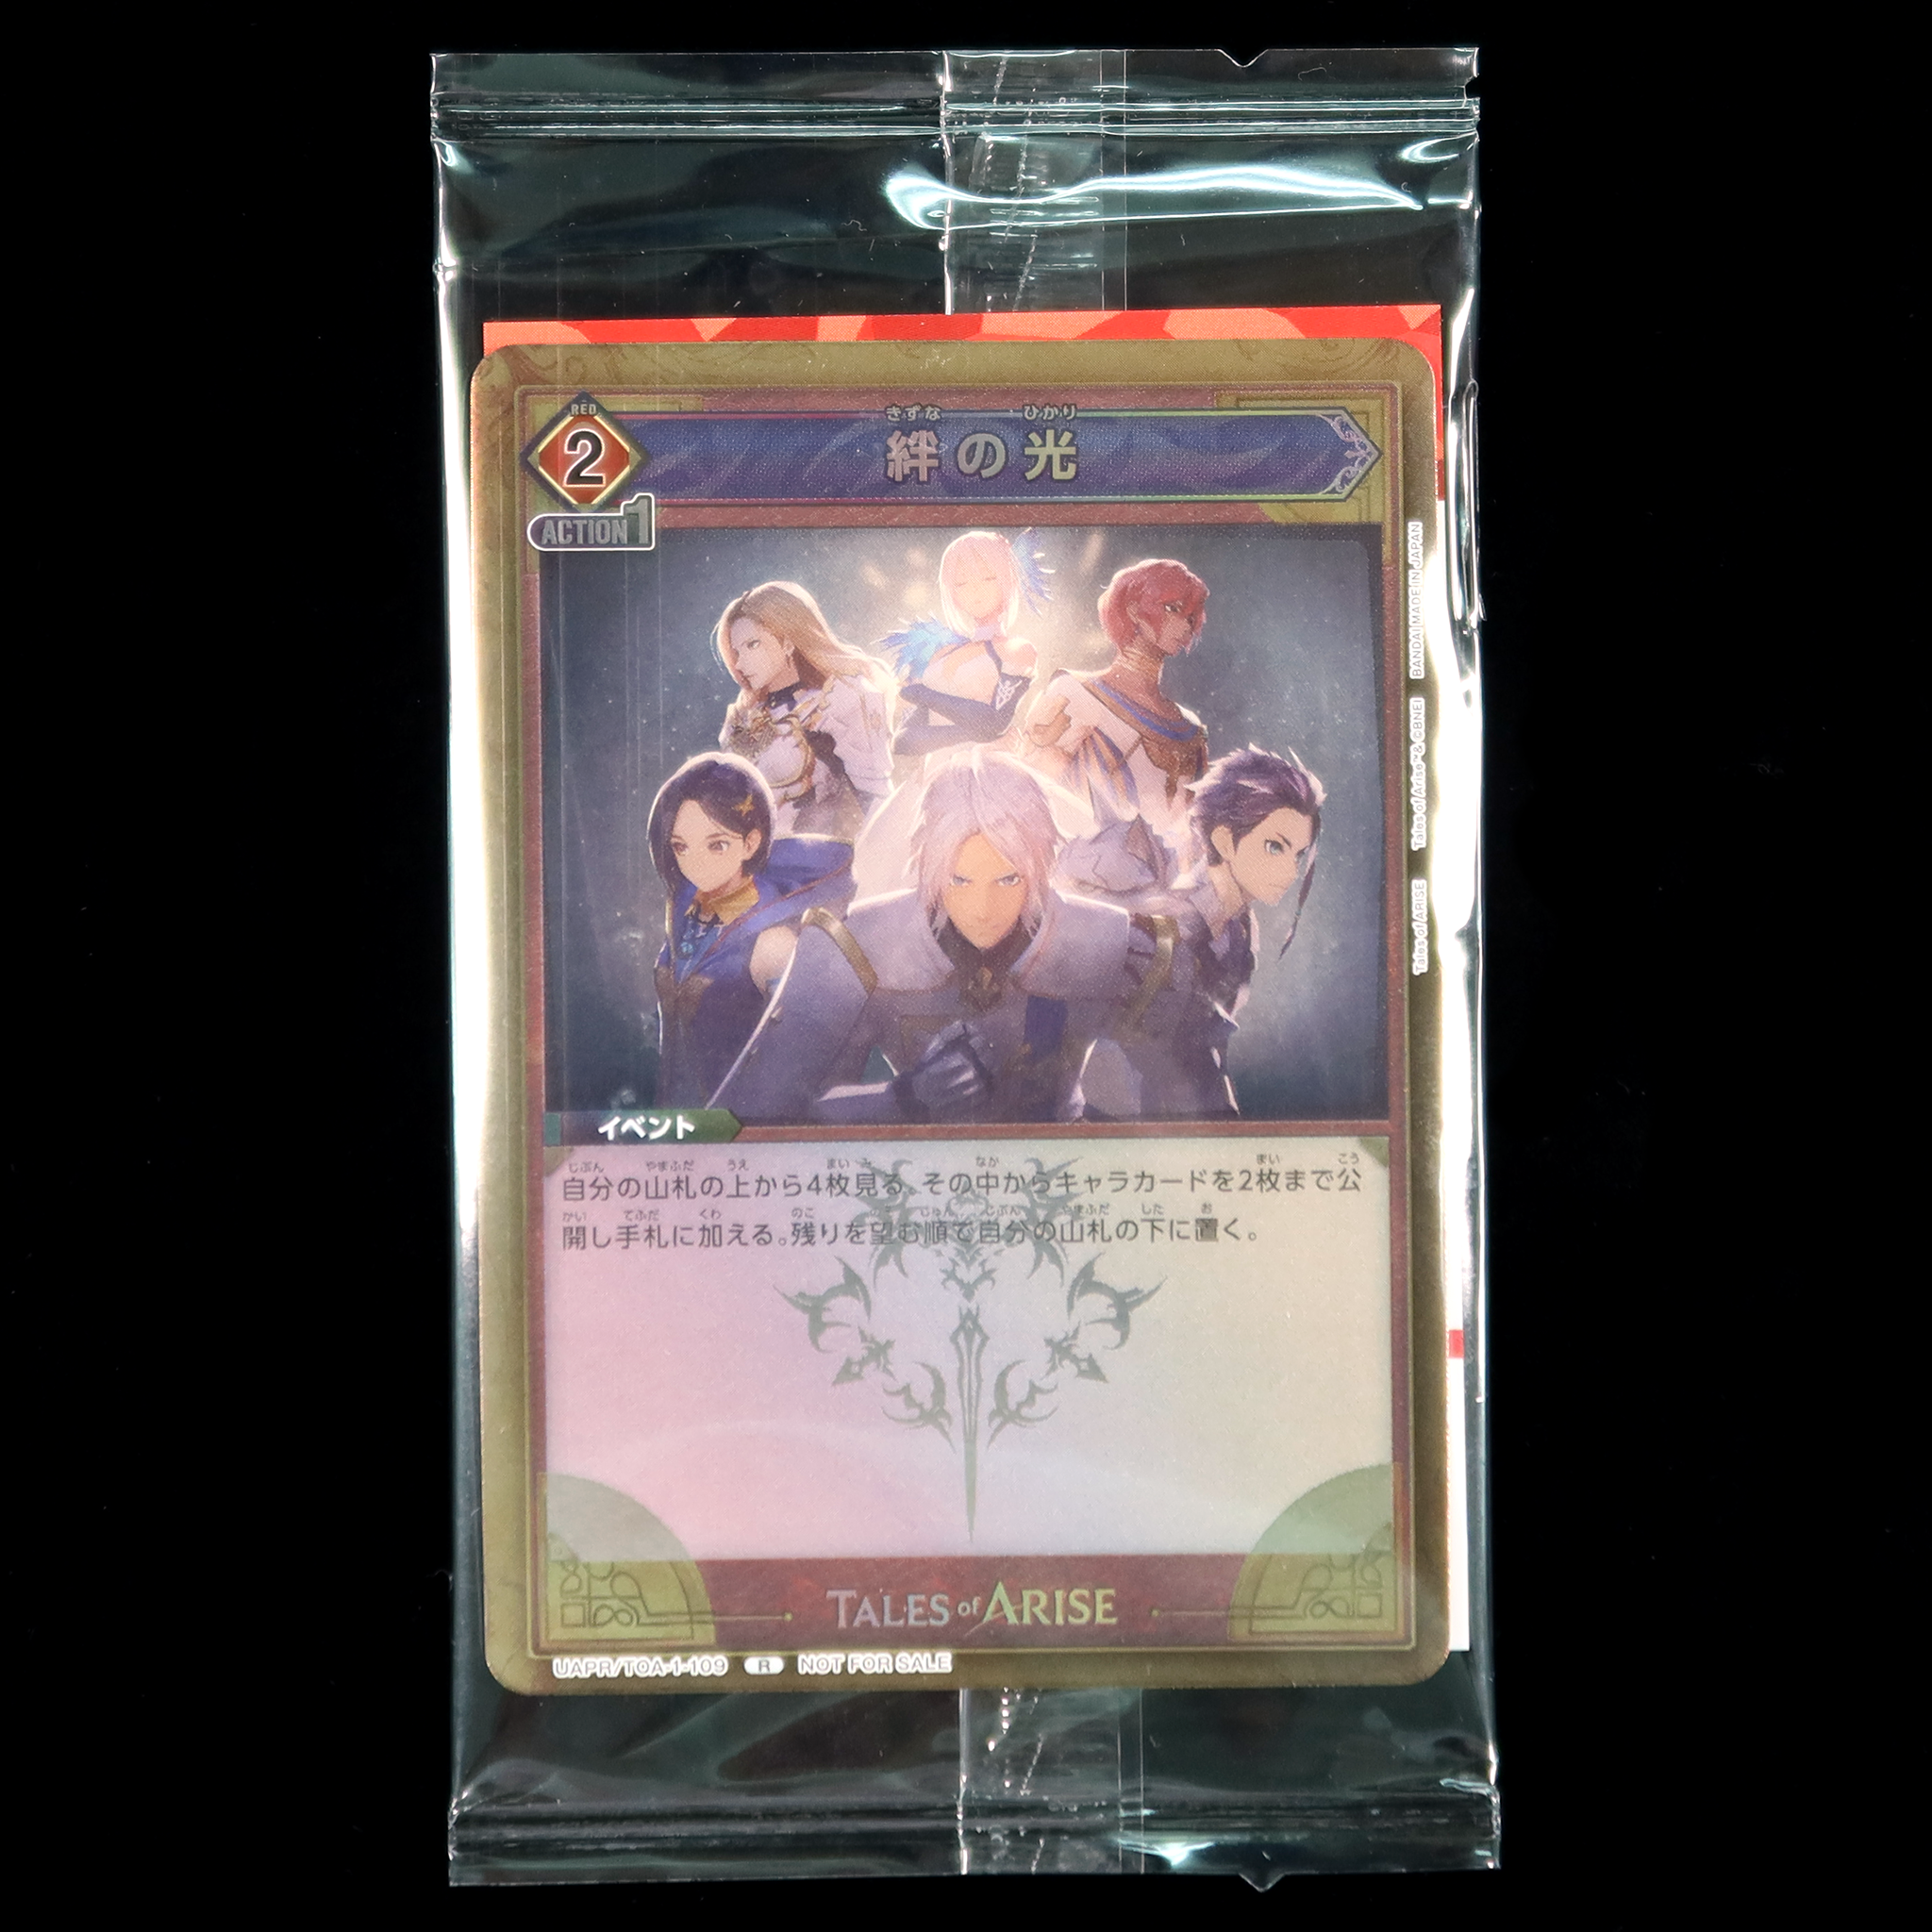 TRADING CARD GAME UNION ARENA UAPR/TOA-1-109 in blister